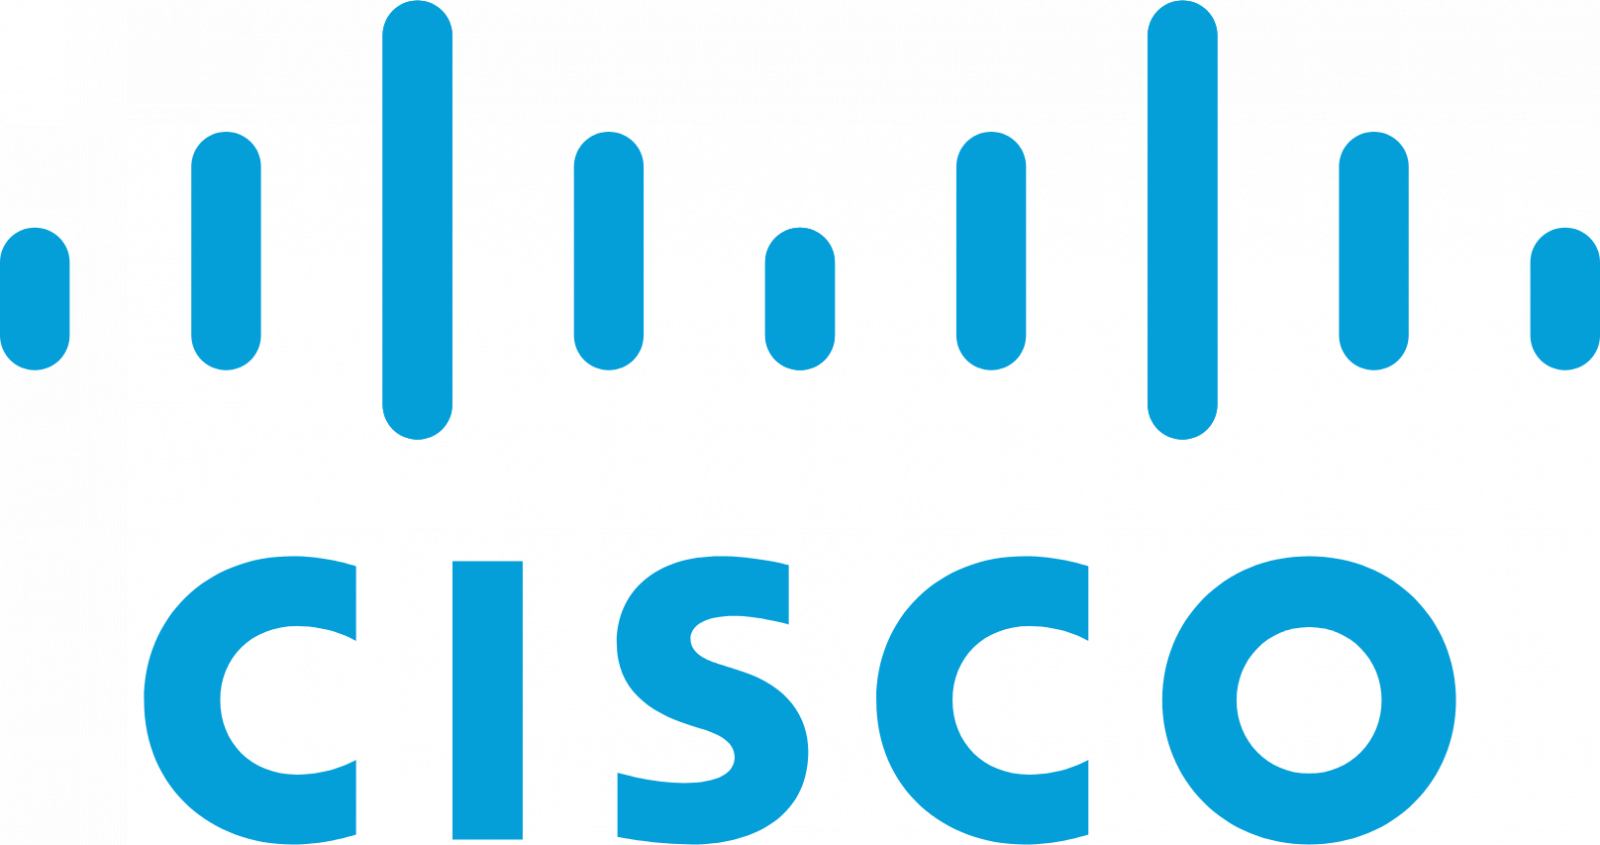 Cisco Systems it companies in San Jose